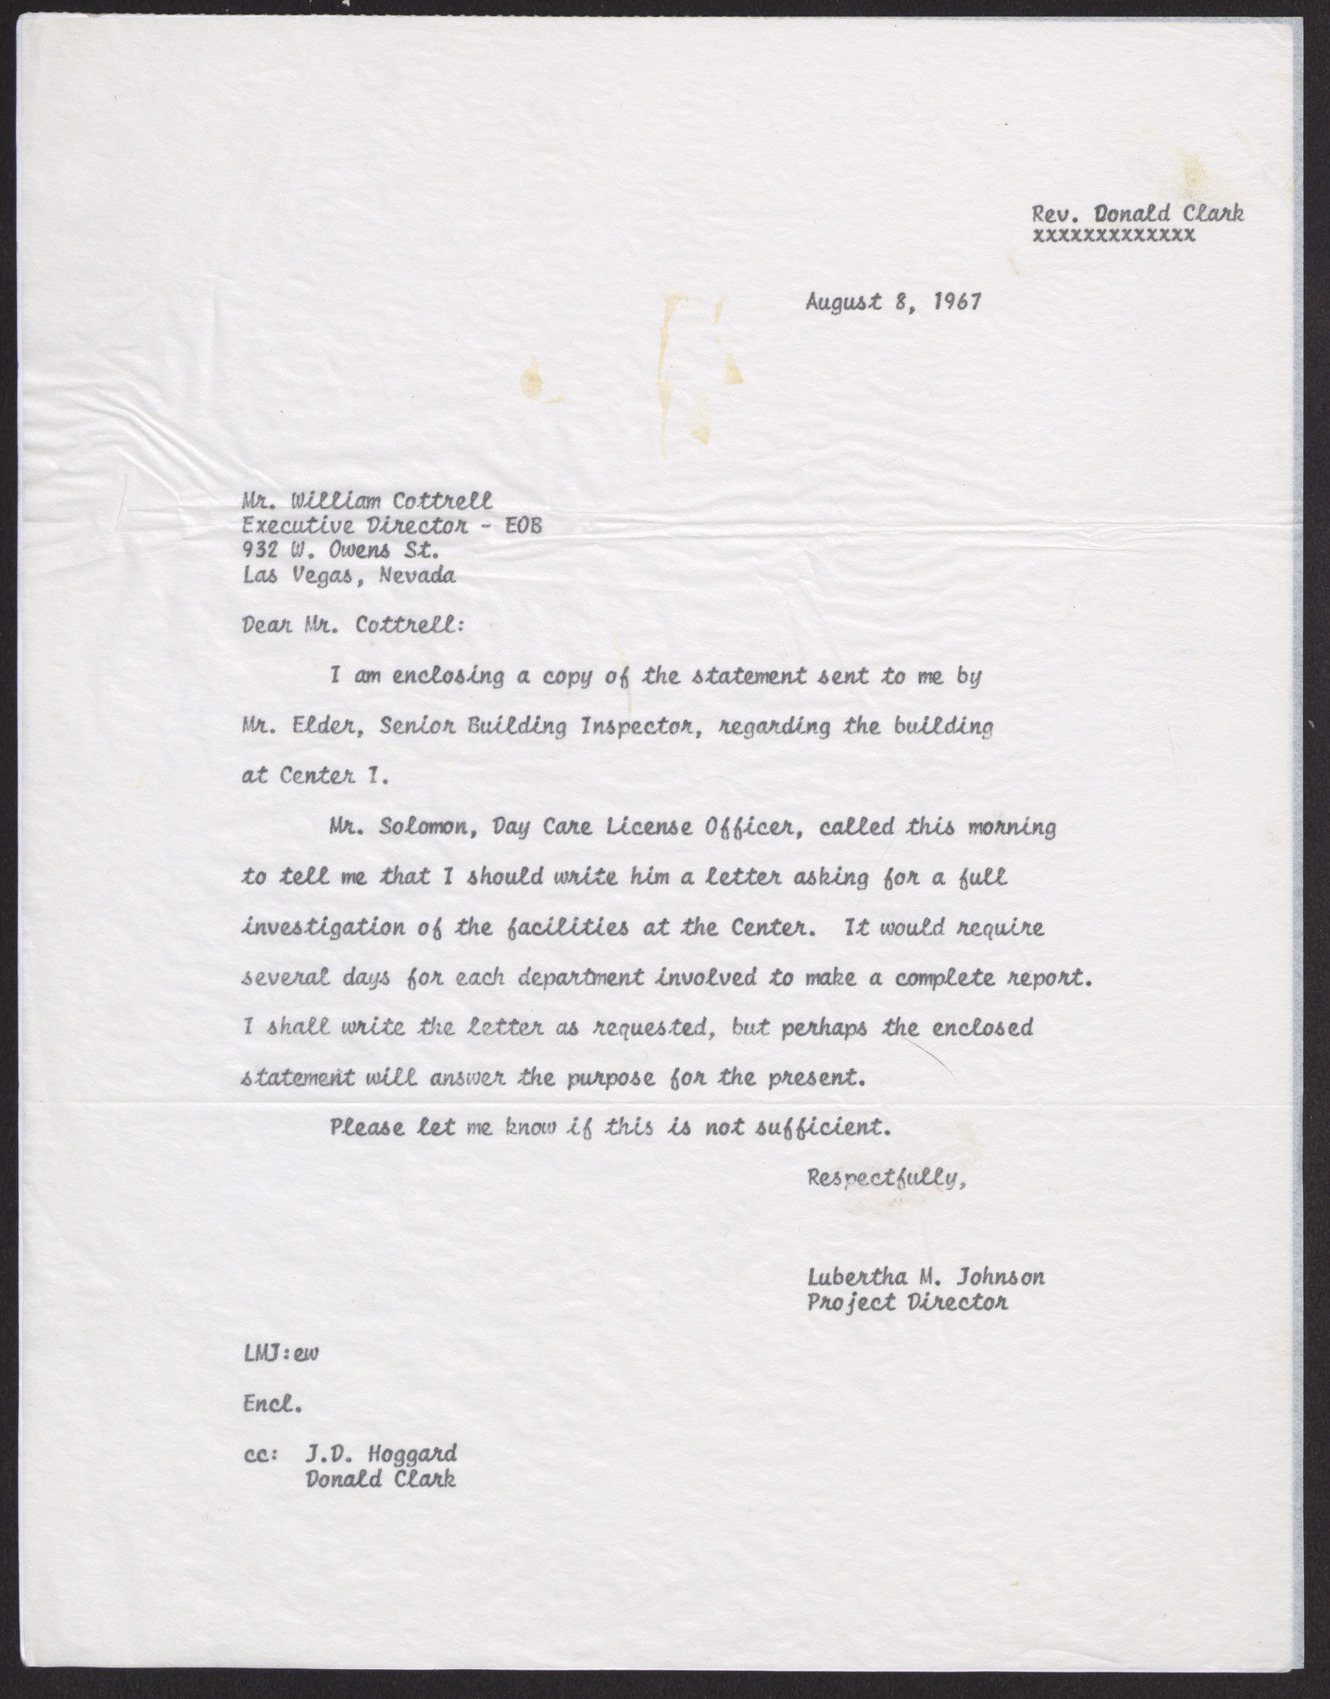 Letter to Mr. William Cottrell from Lubertha M. Johnson, August 8, 1967